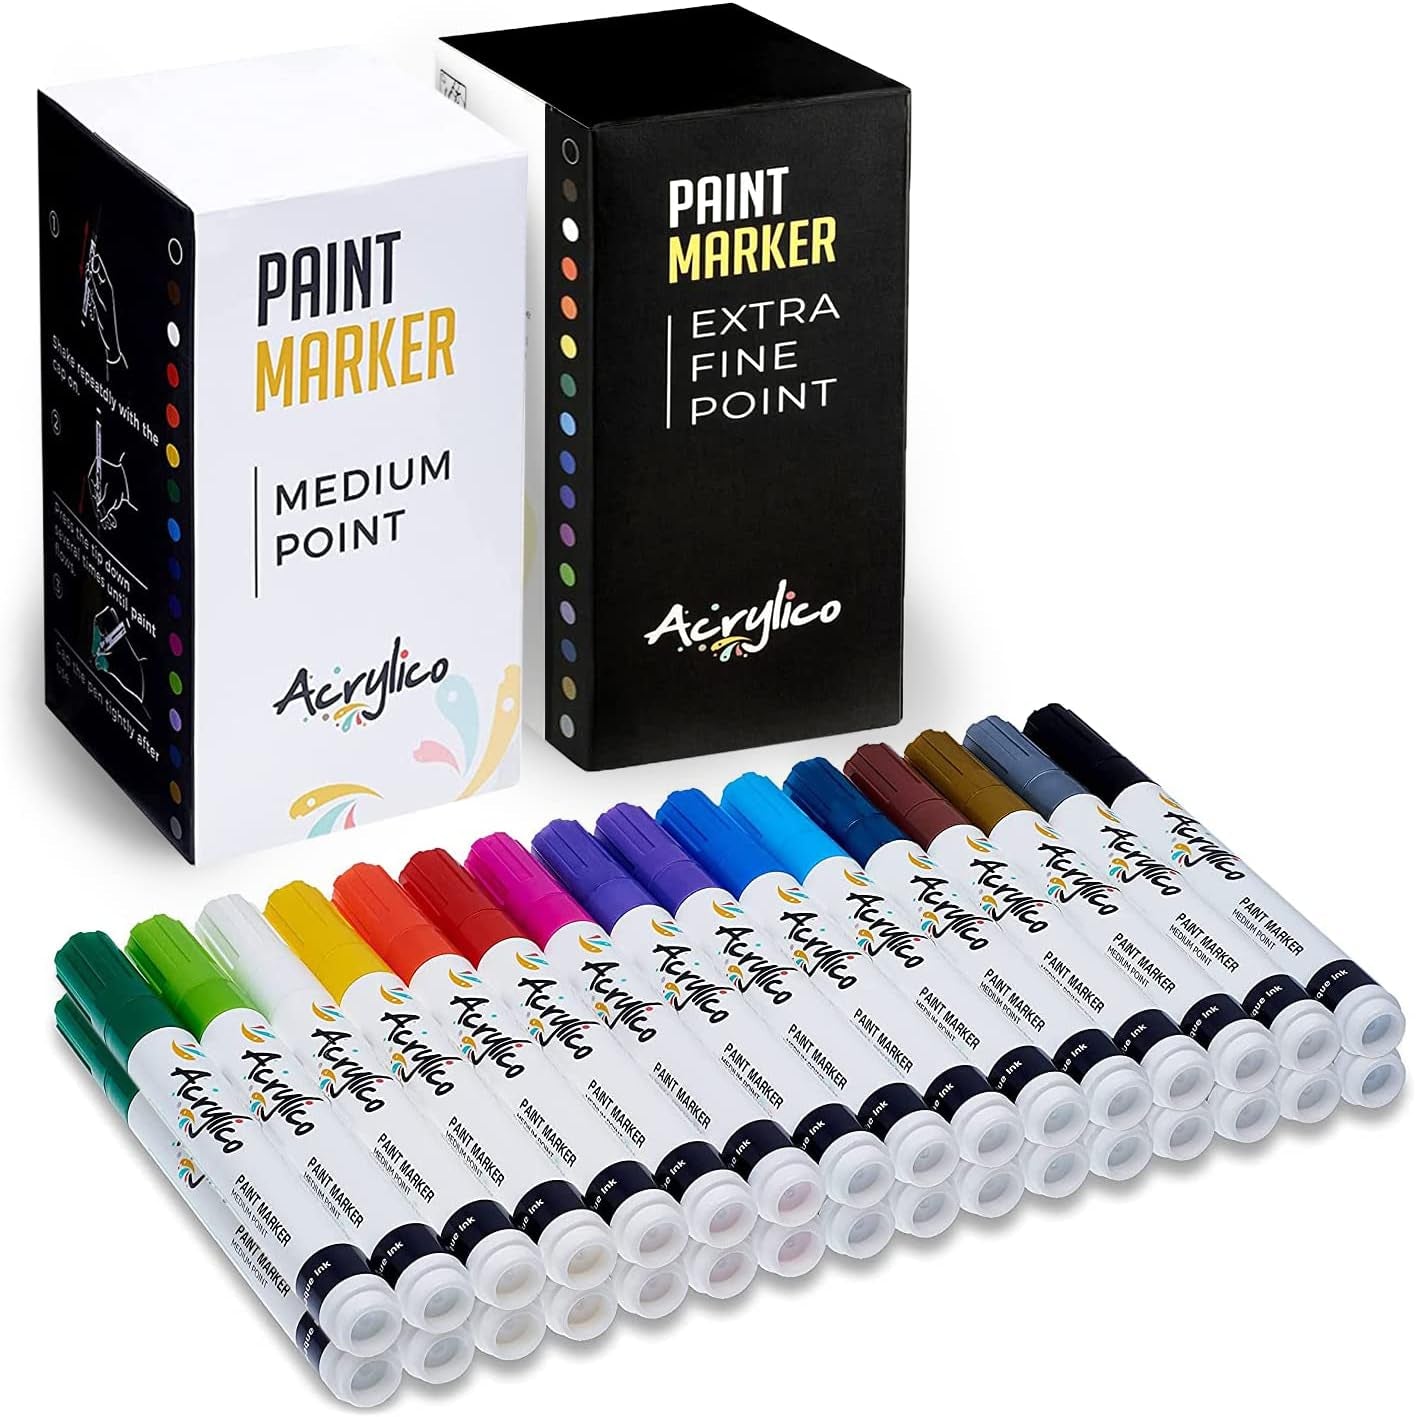 Acrylic Paint Pen Set of 32 - Extra Fine & Medium Tip Point with 8 Metallic Markers - Rock, Glass, Wood & Fabric Painting Art Supplies, Adults & Kids Arts Craft Kit for Scrapbooking & Drawing